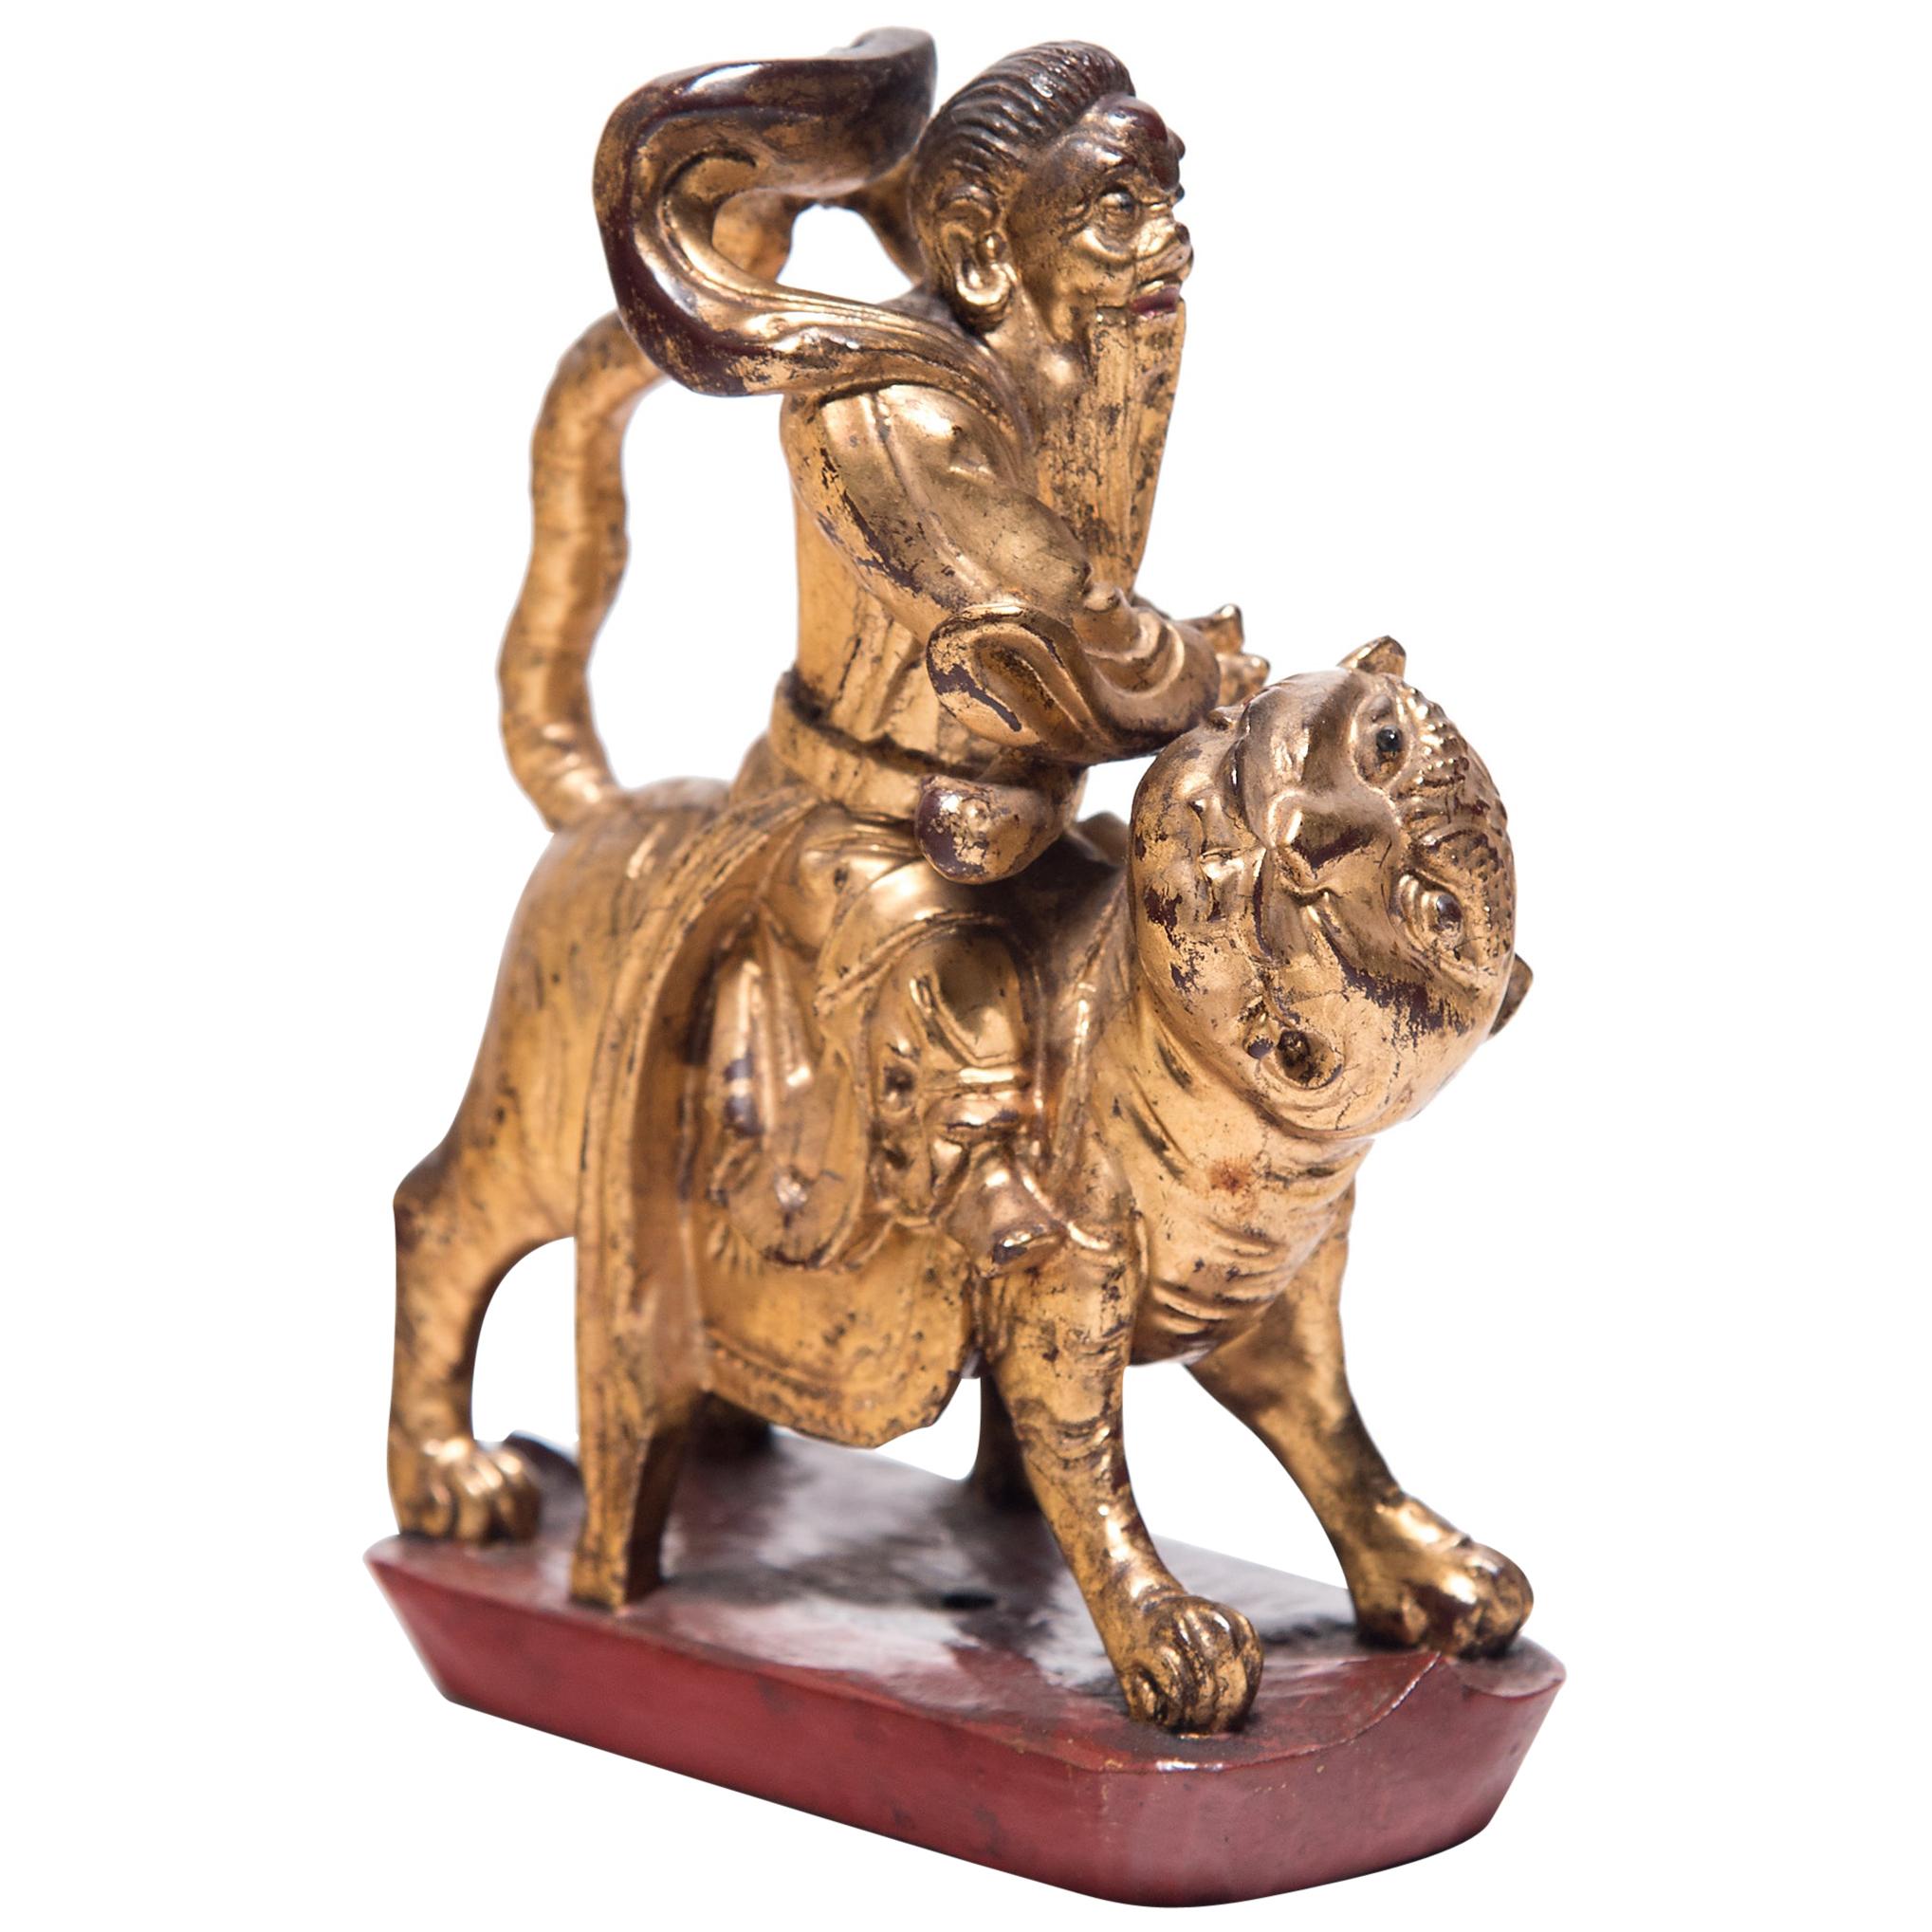 Chinese Mythical Gilt Figure with Lion, circa 1850